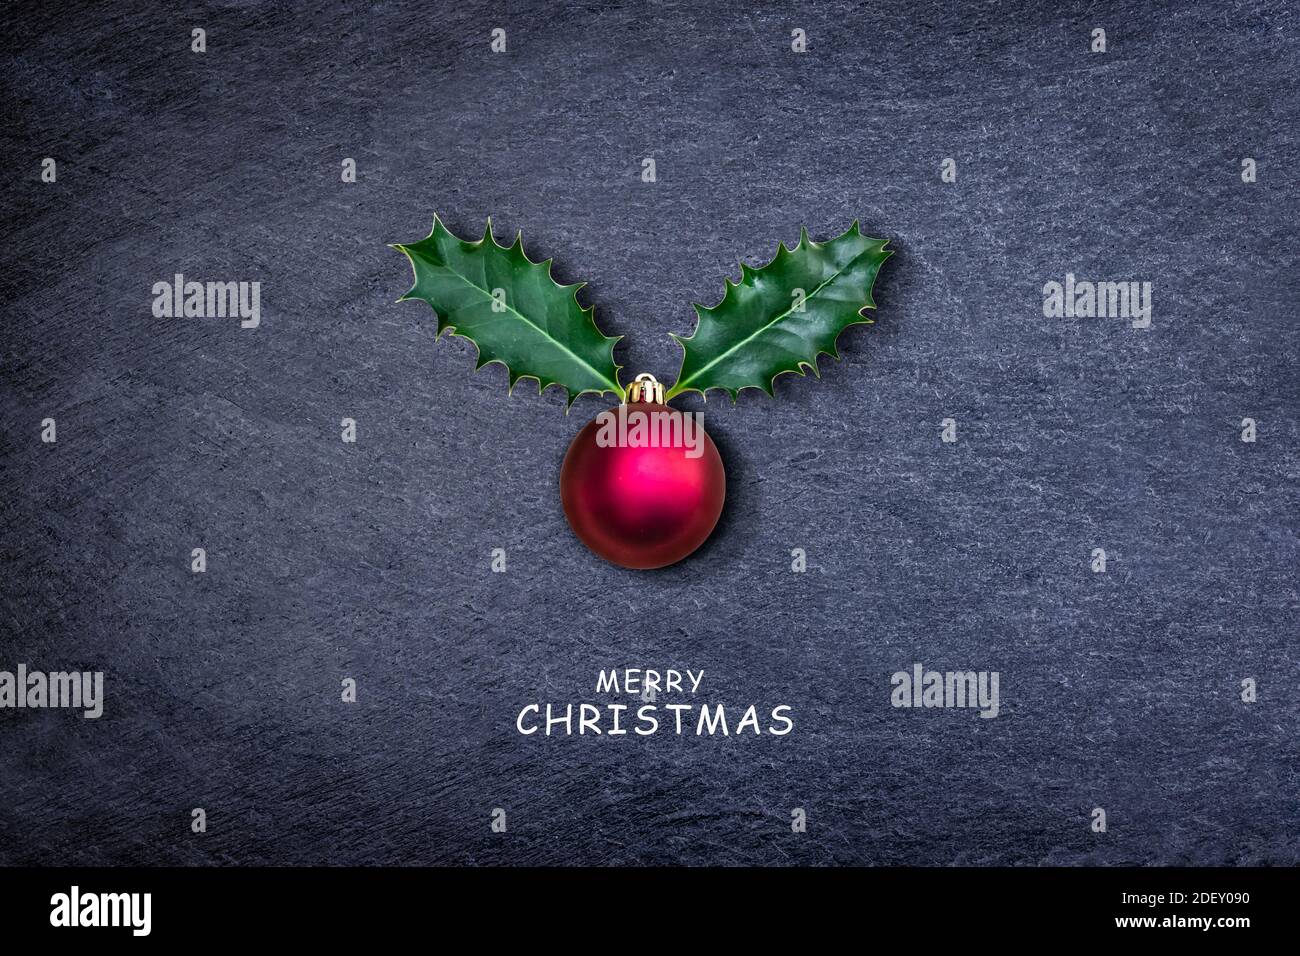 Christmas card - Reindeer face made of Holly leaves and red bauble on dark stone. Stock Photo